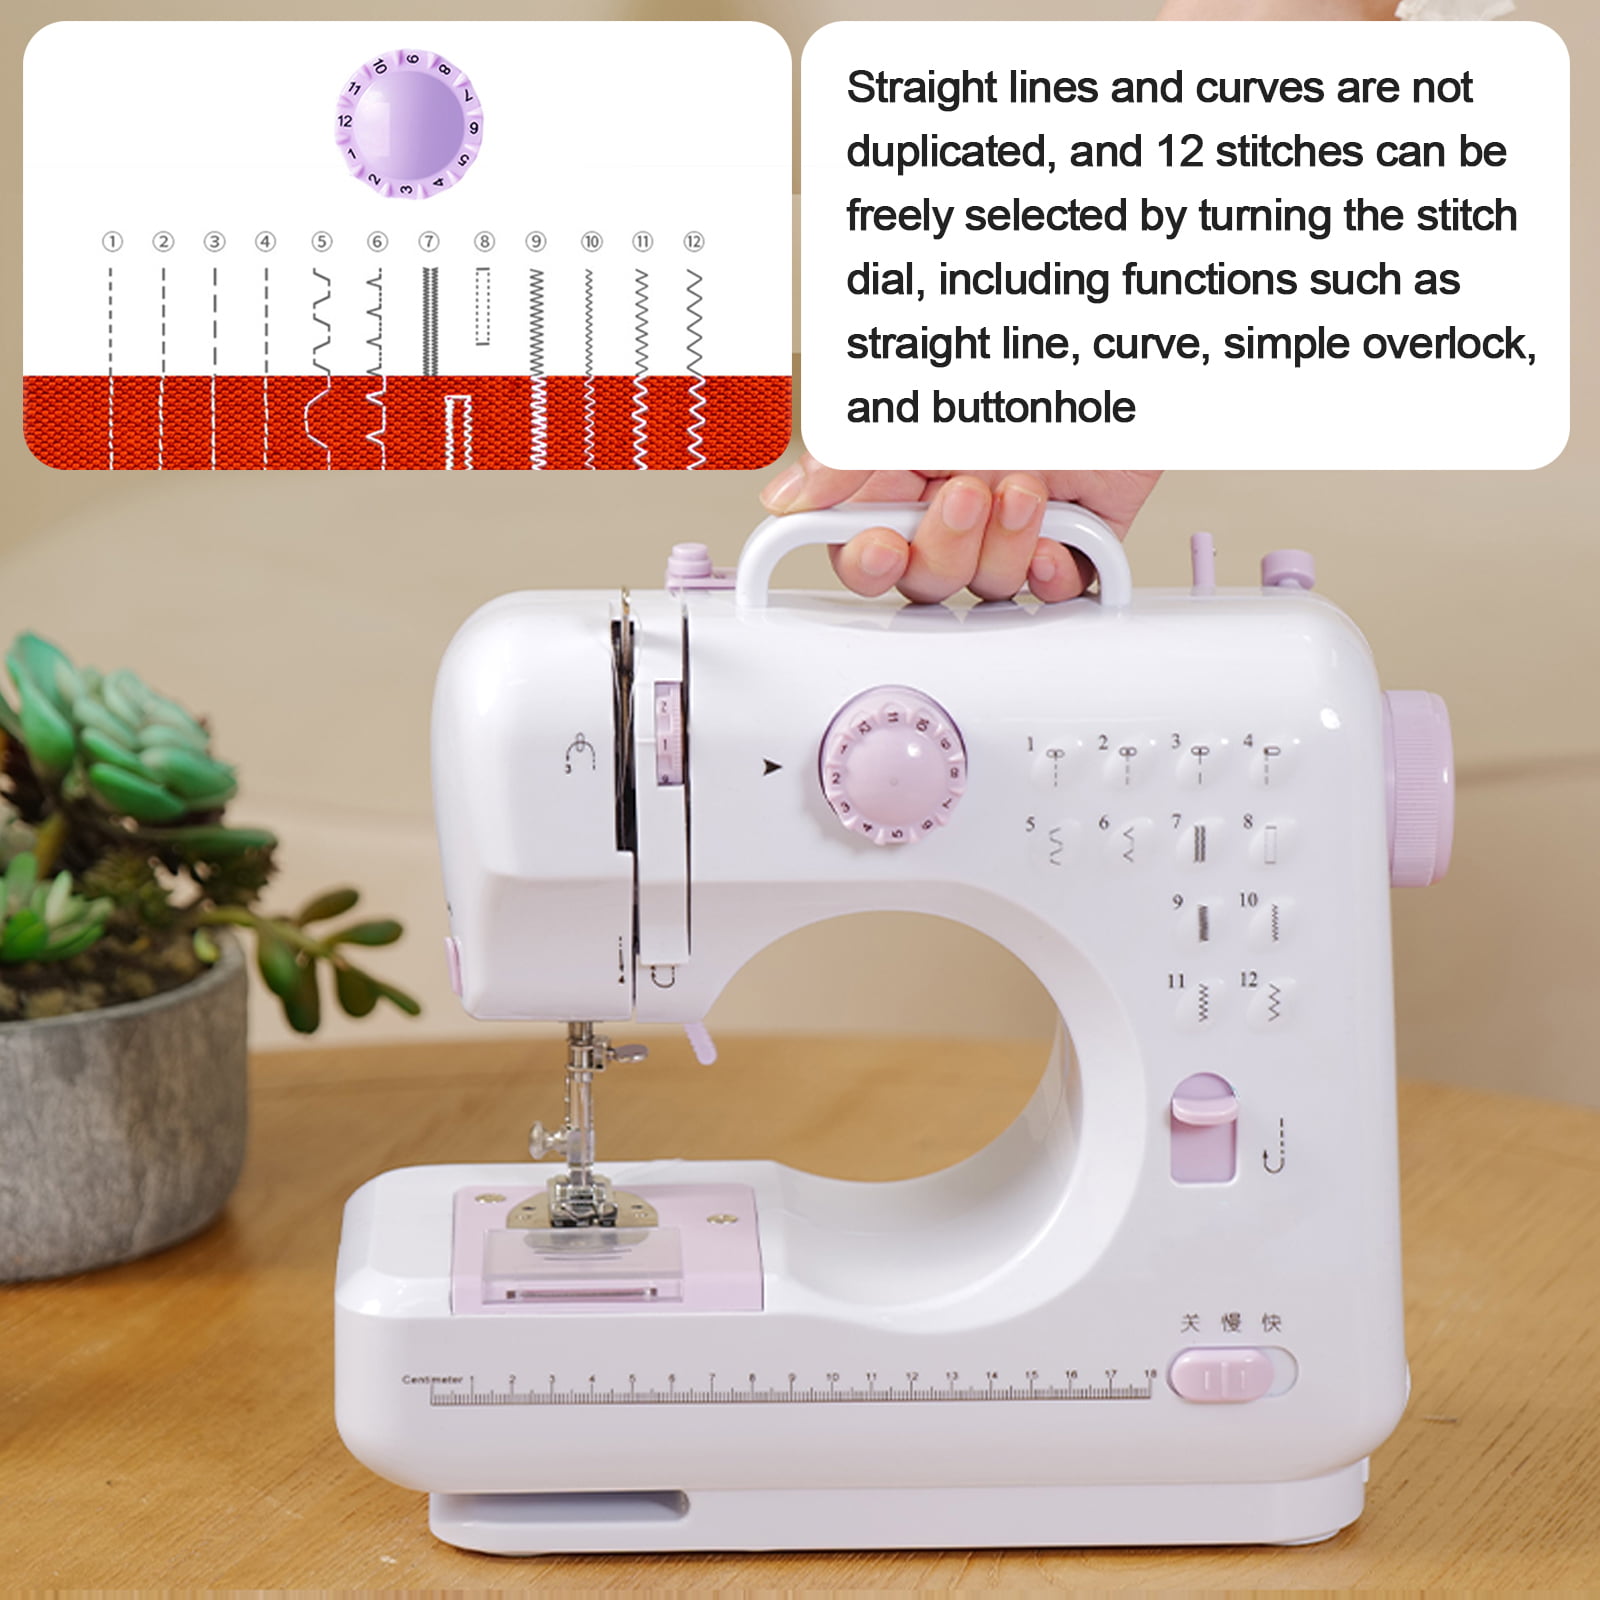 Viferr Mini Sewing Machine 12 Built-in Stitches Household Handheld Electric Portable Sewing Machine with Extension Table for Beginners and Kids Easy